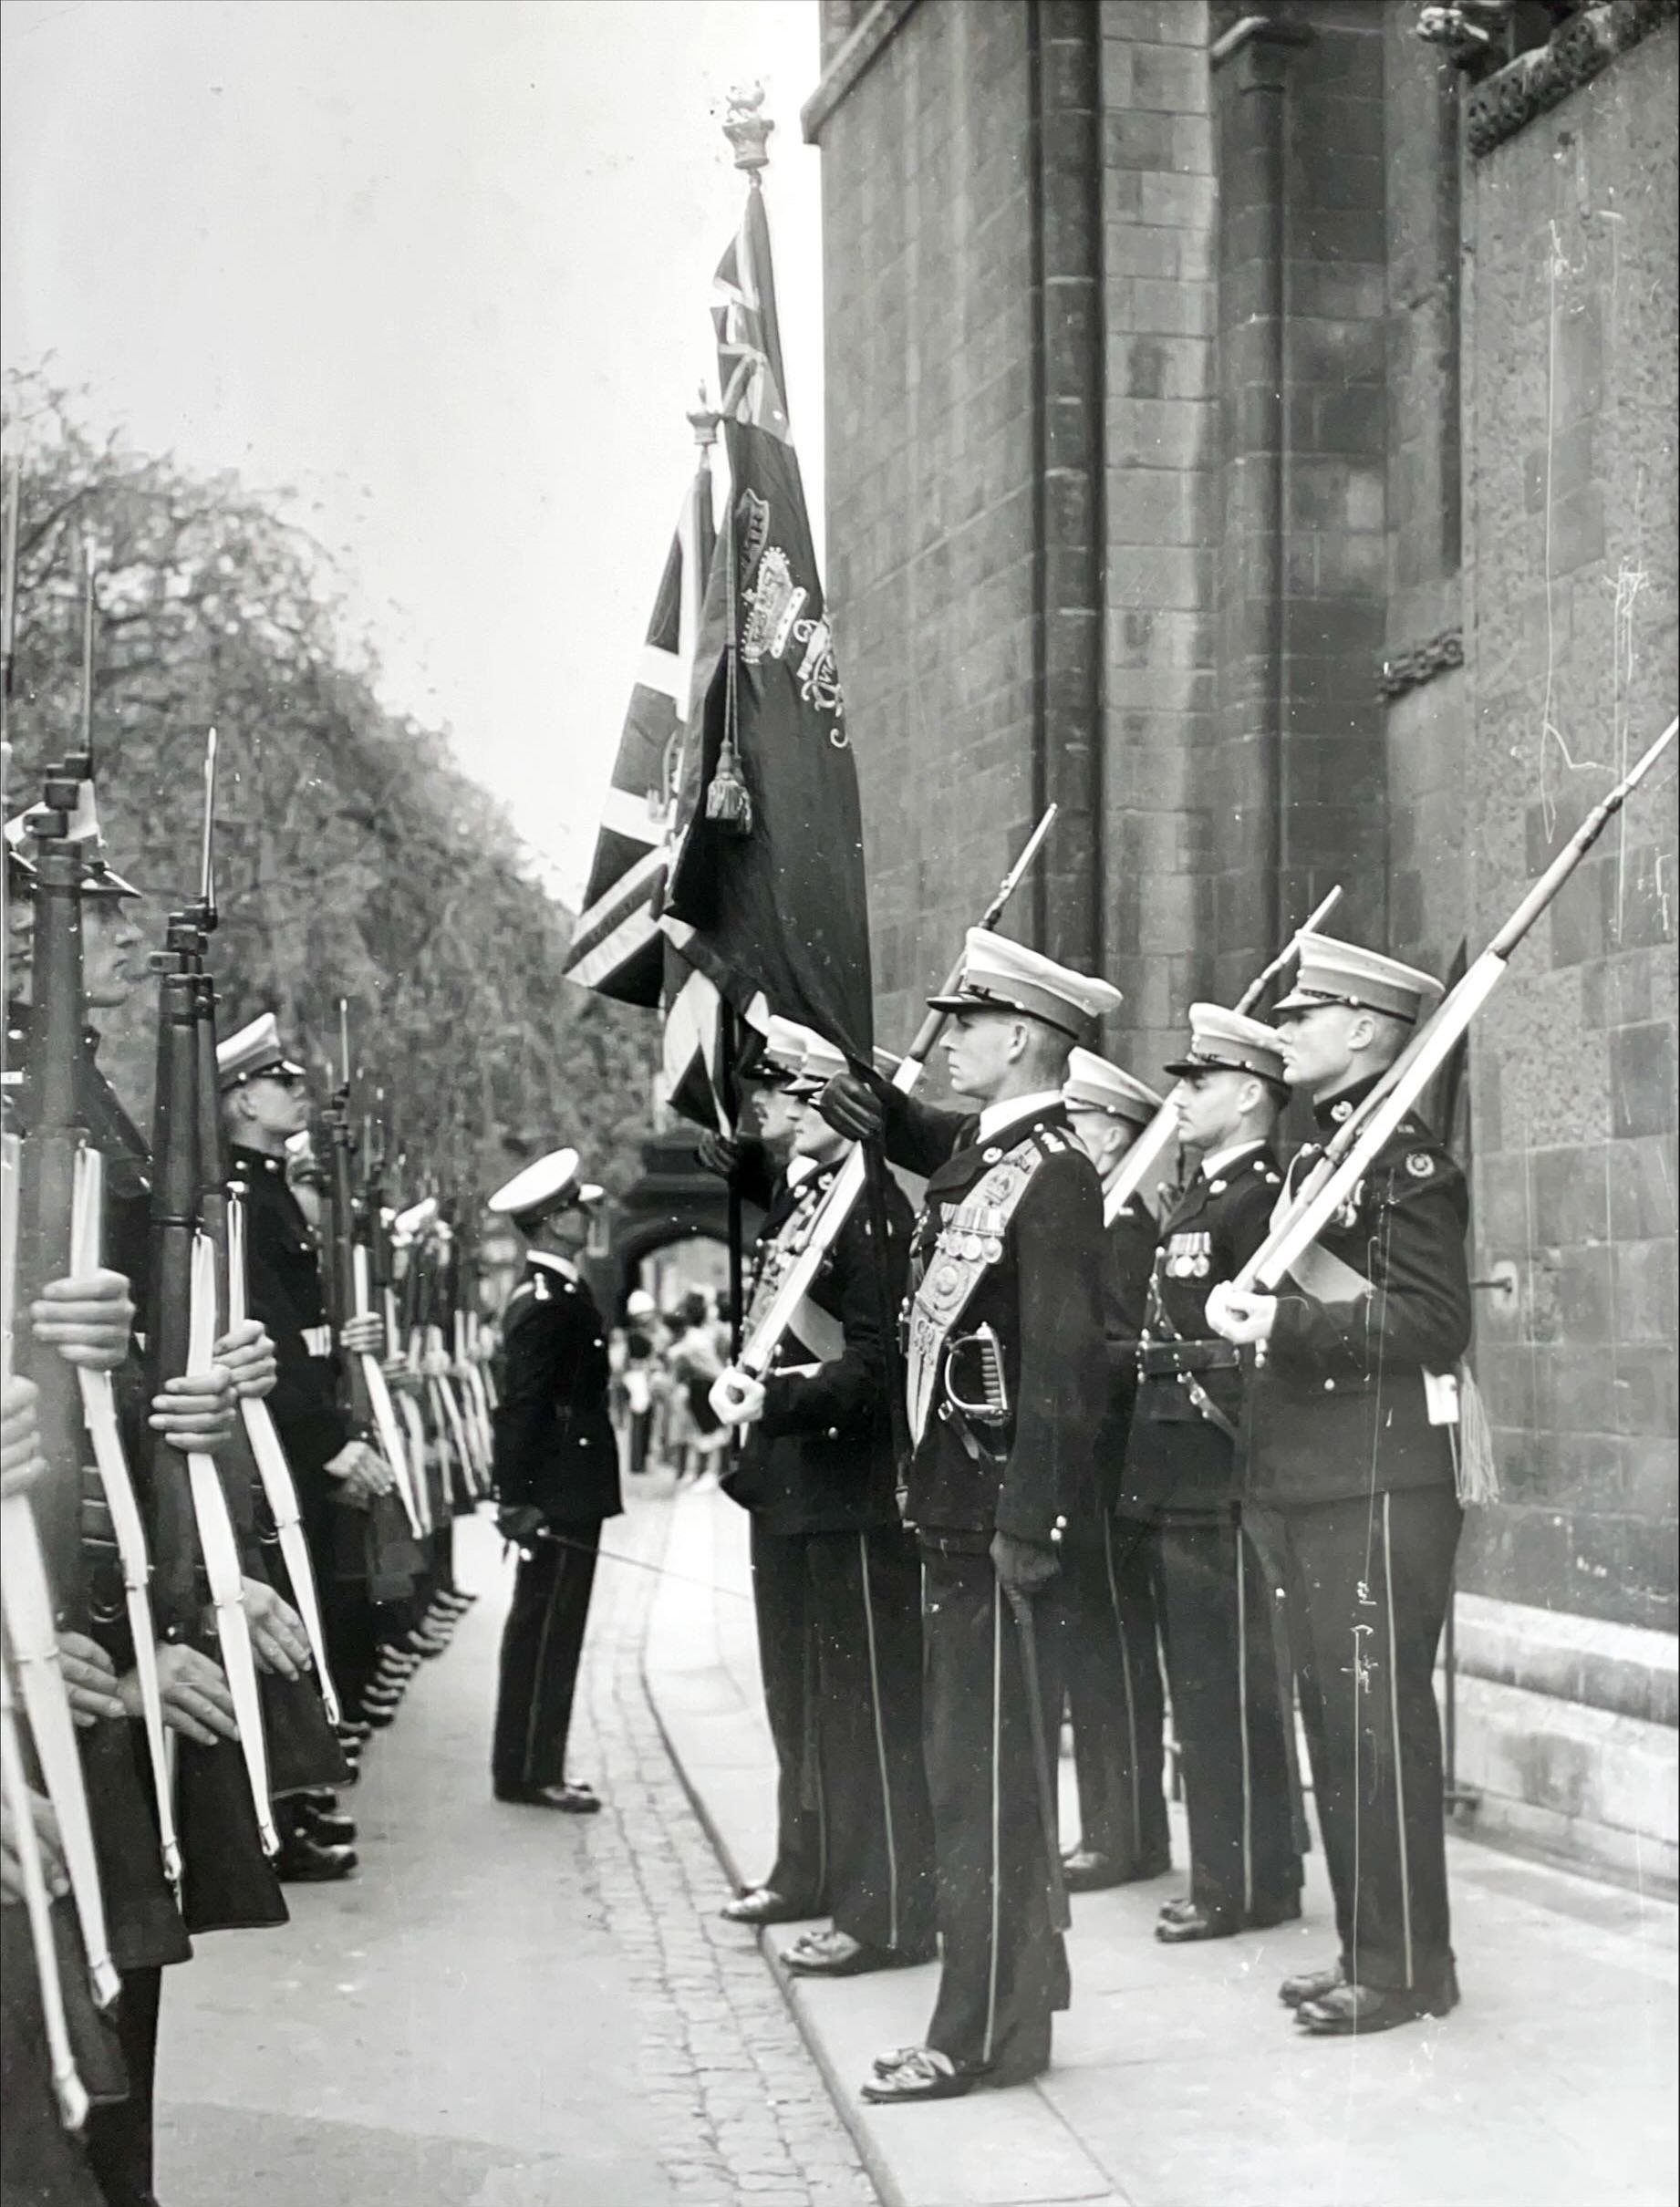 Laying of the regimental colours of the Royal Marines, Chatham, March 1950 (1 of 3)